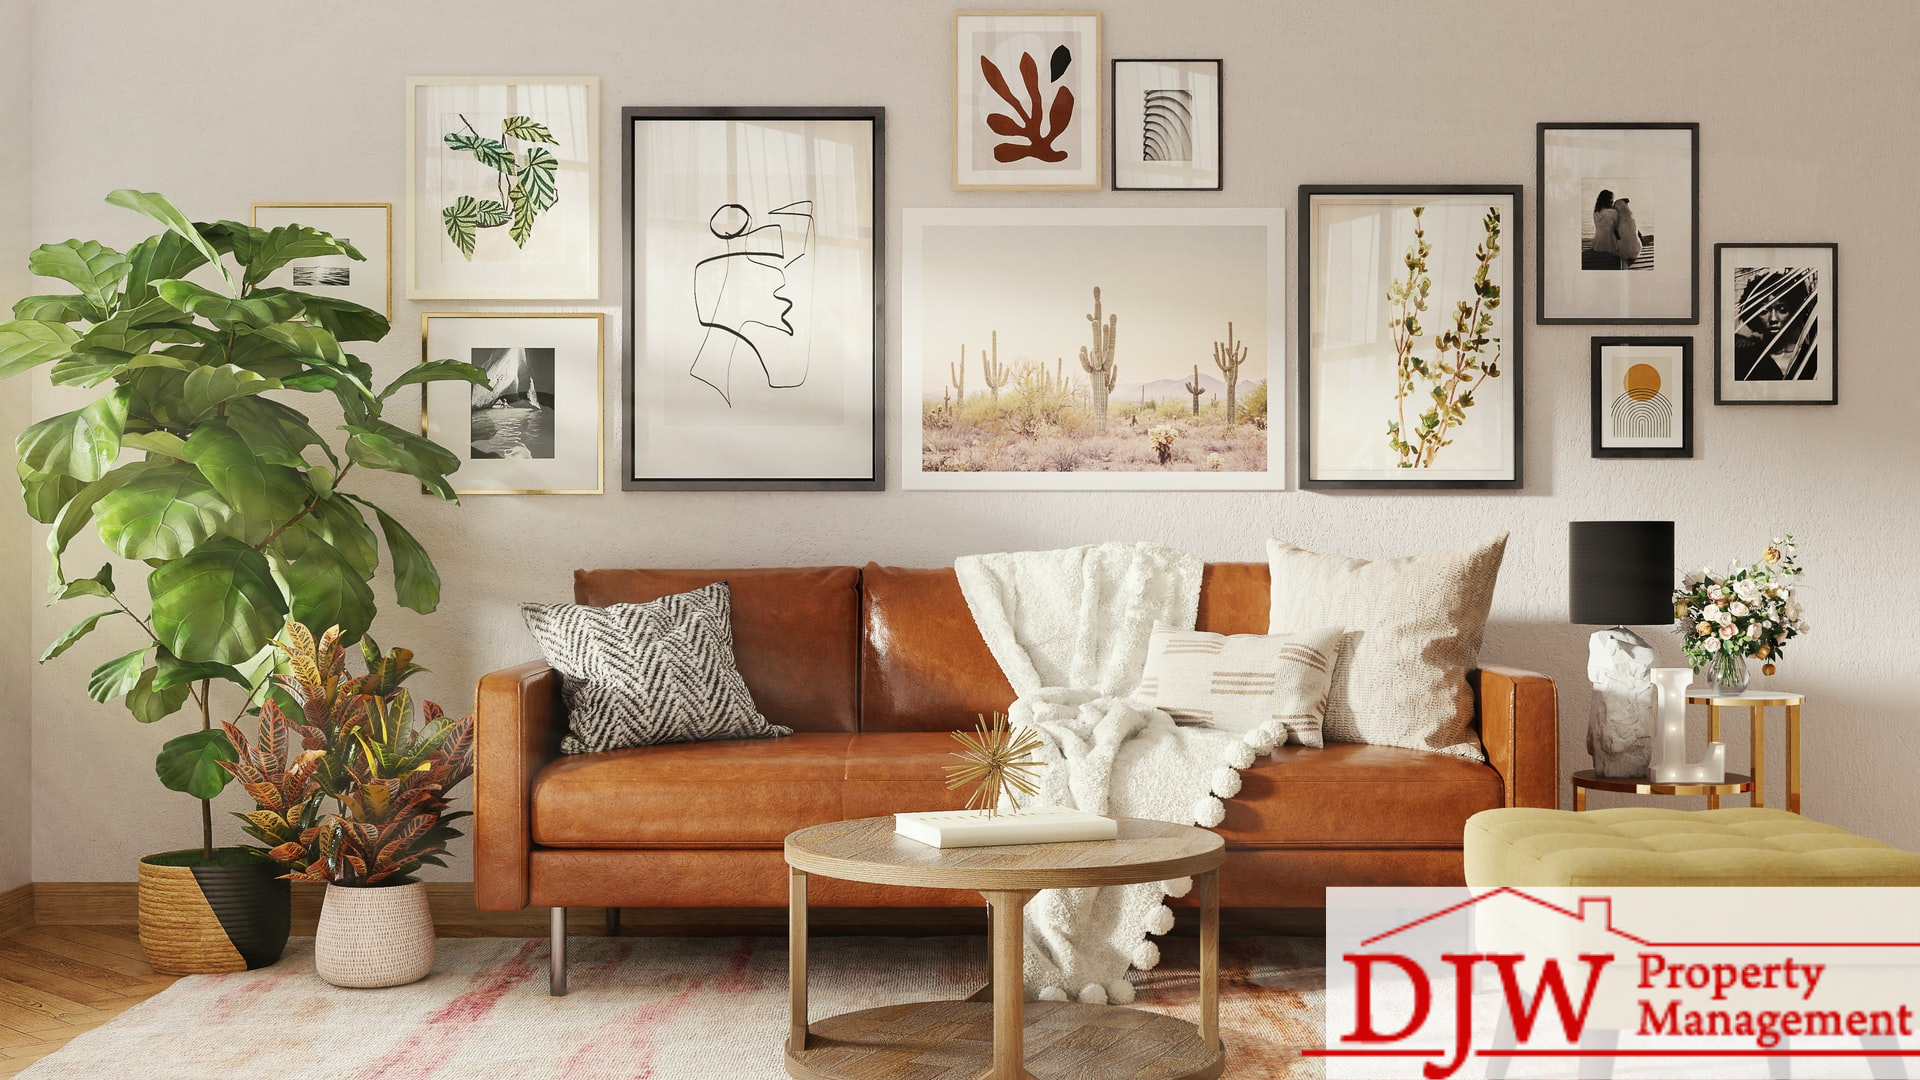 A living room with multiple photos, plants, pillows, and a brown leather couch.